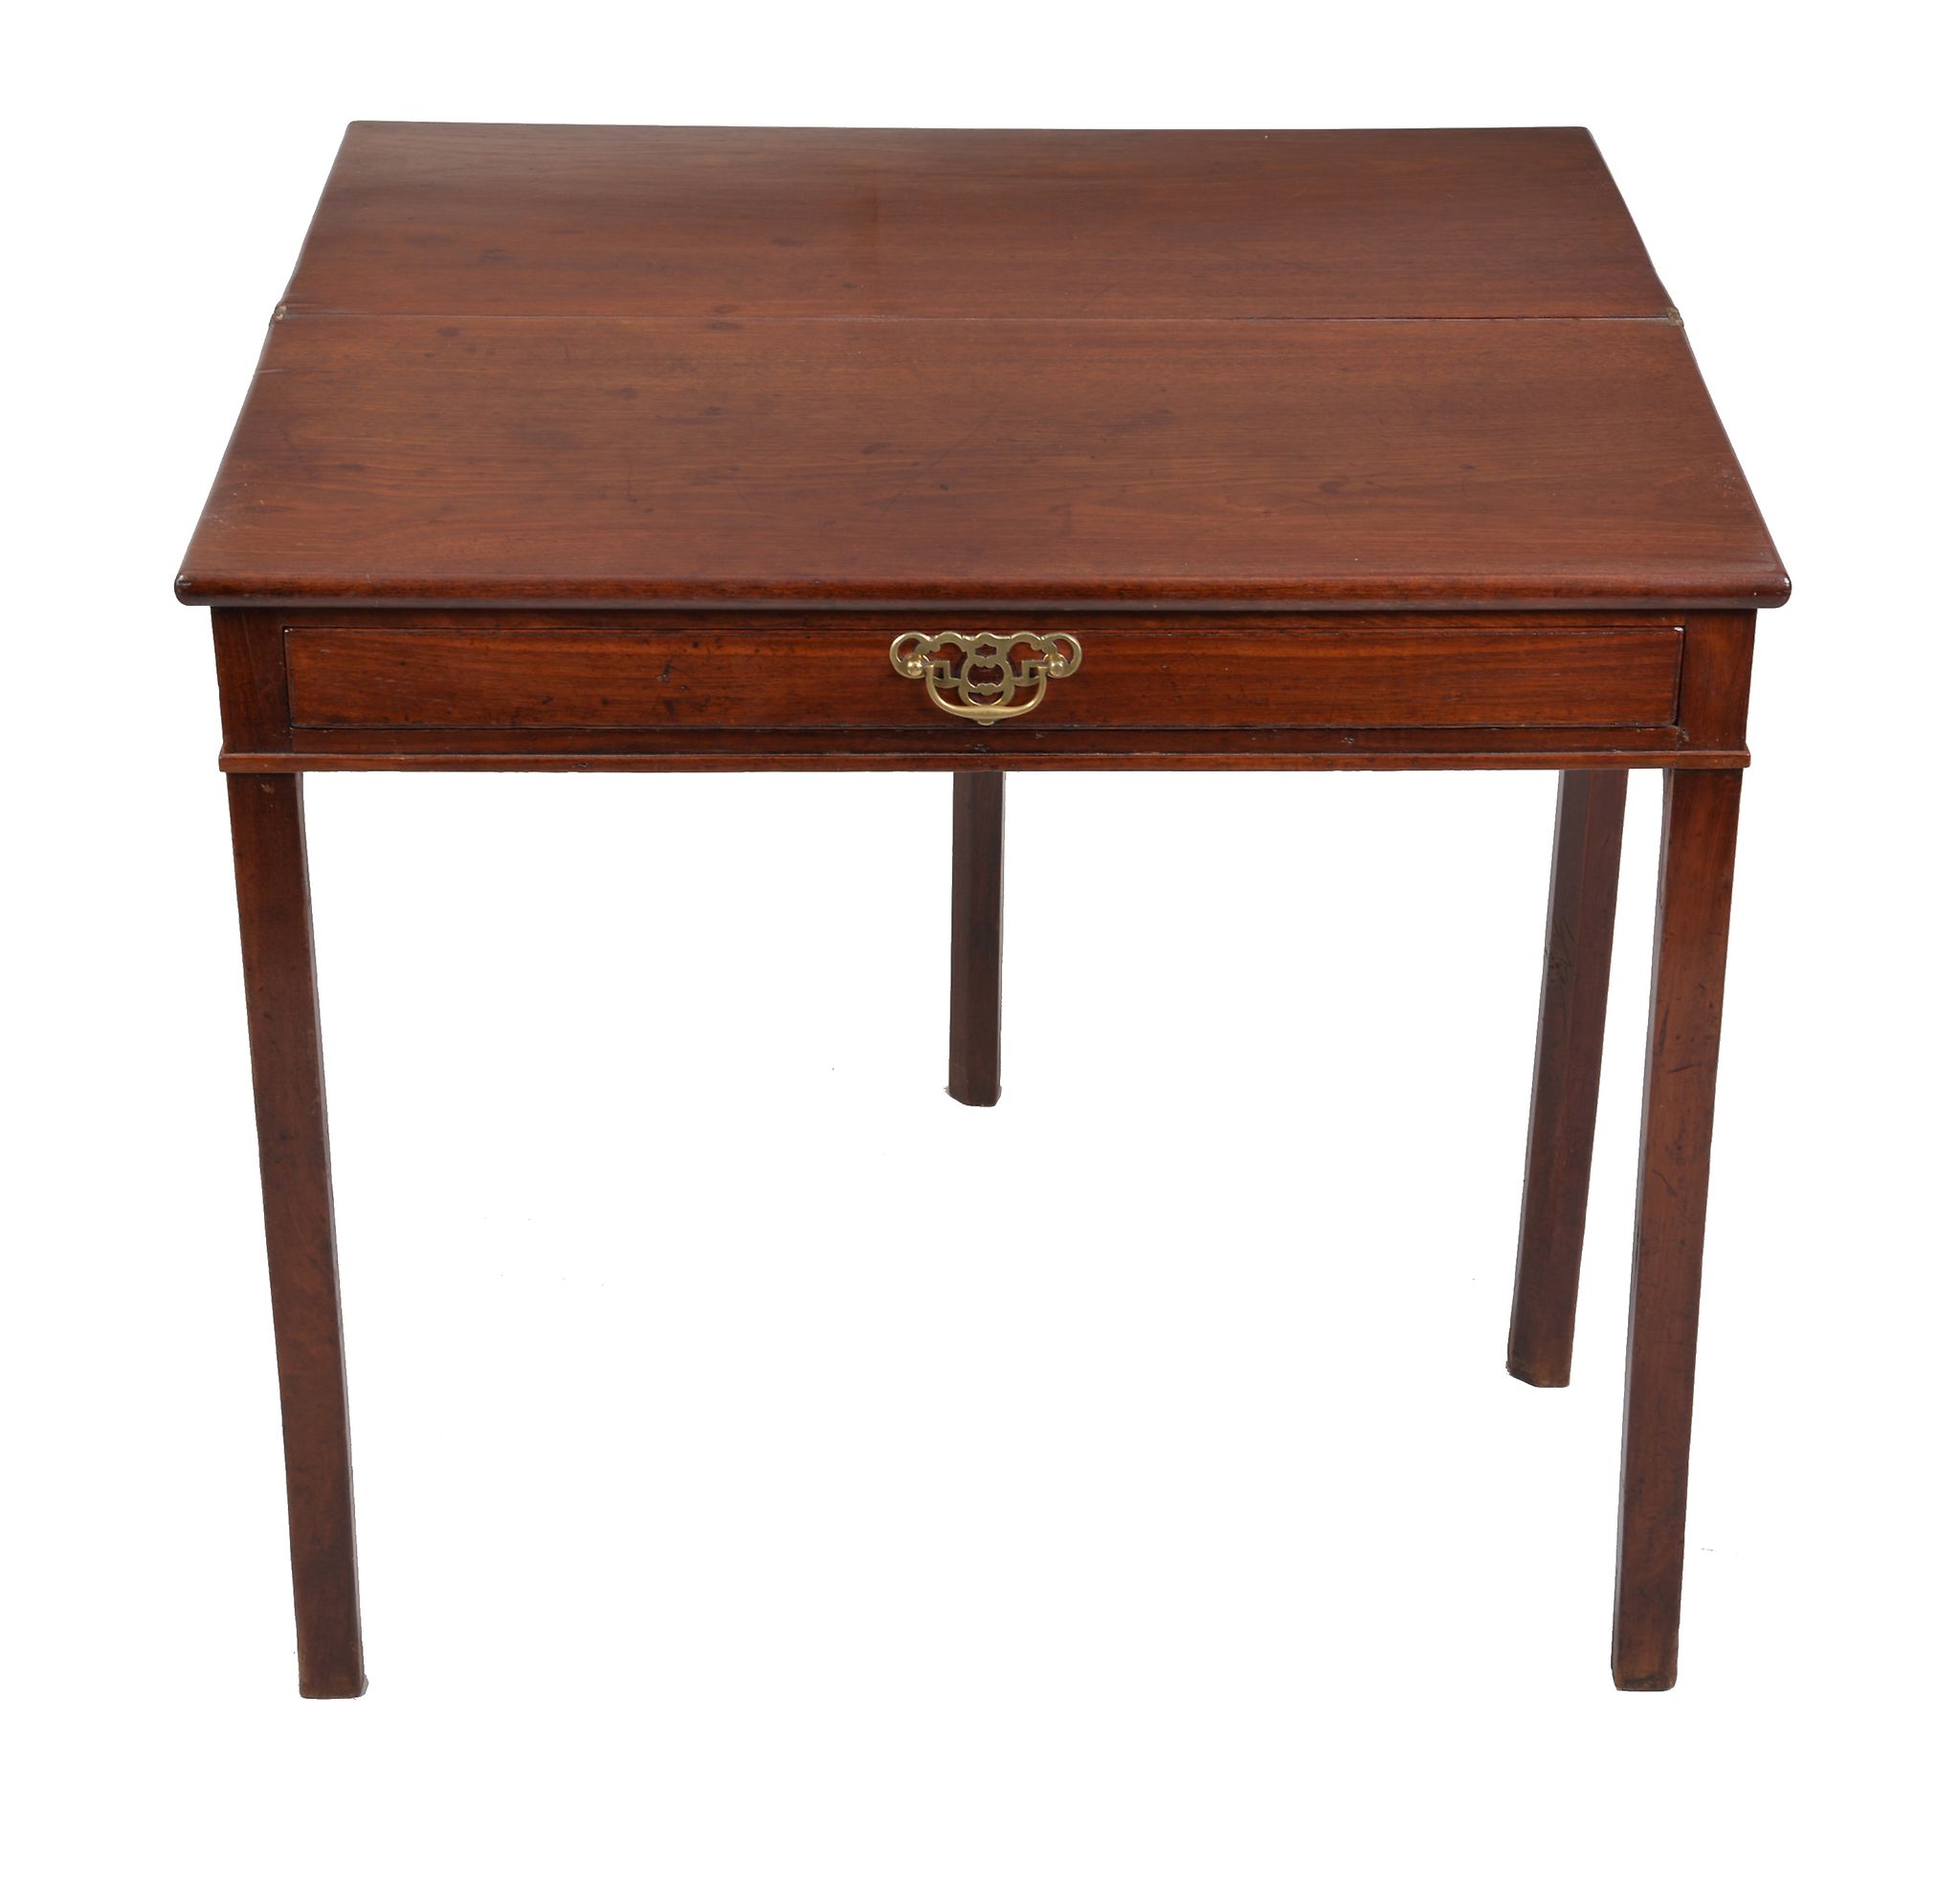 A George III mahogany tea table , circa 1760, with single frieze drawer and chamfered supports - Image 2 of 2